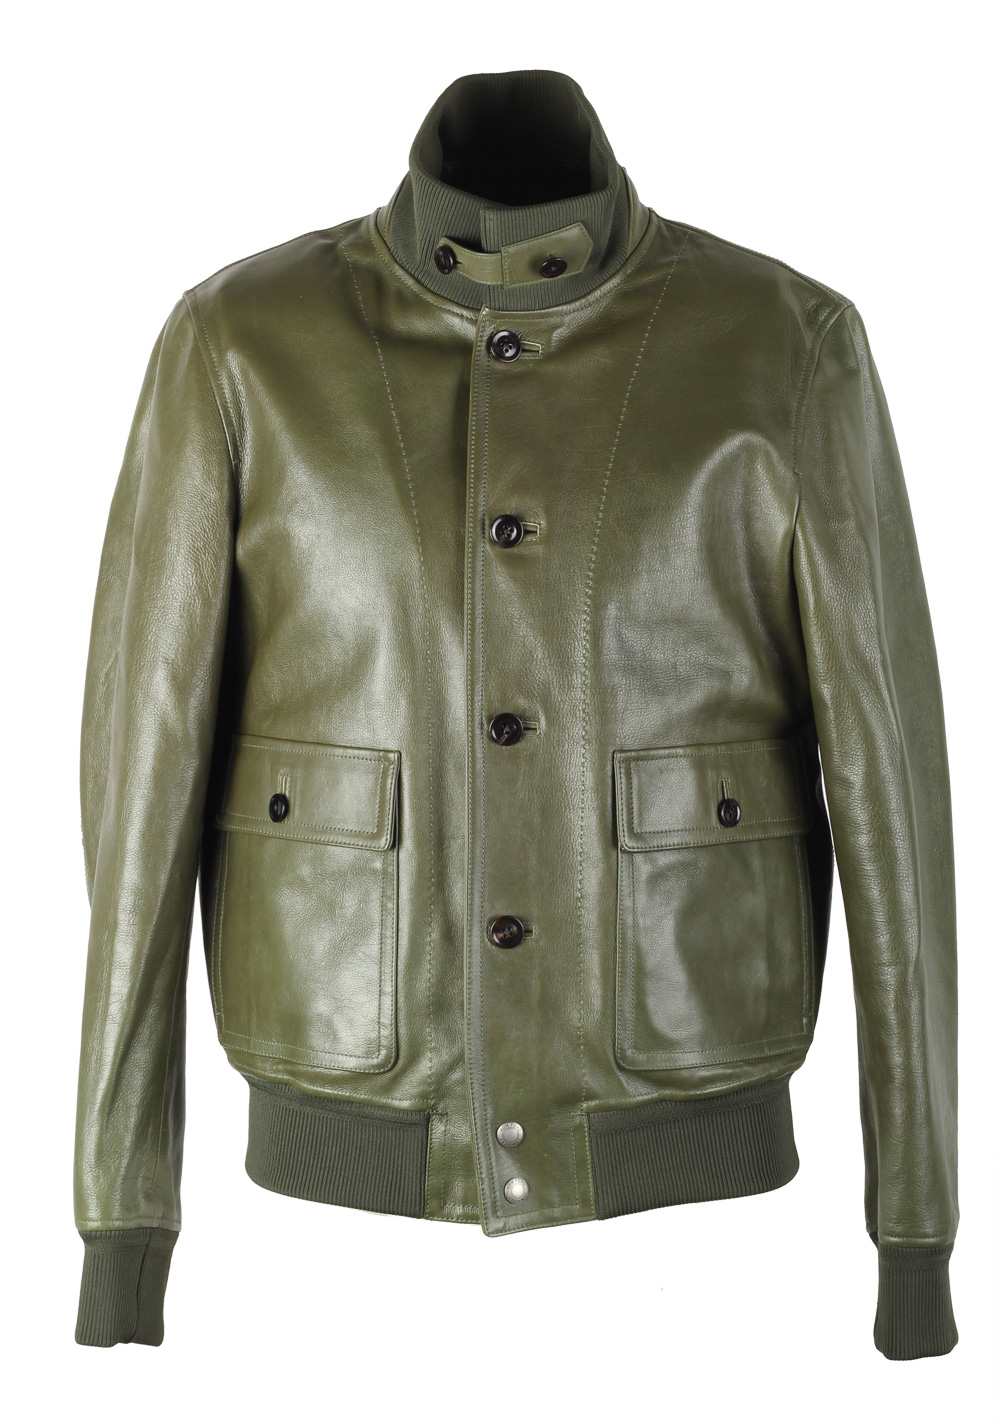 TOM FORD Green Leather Jacket Coat Size 48 / 38R U.S. Outerwear ...